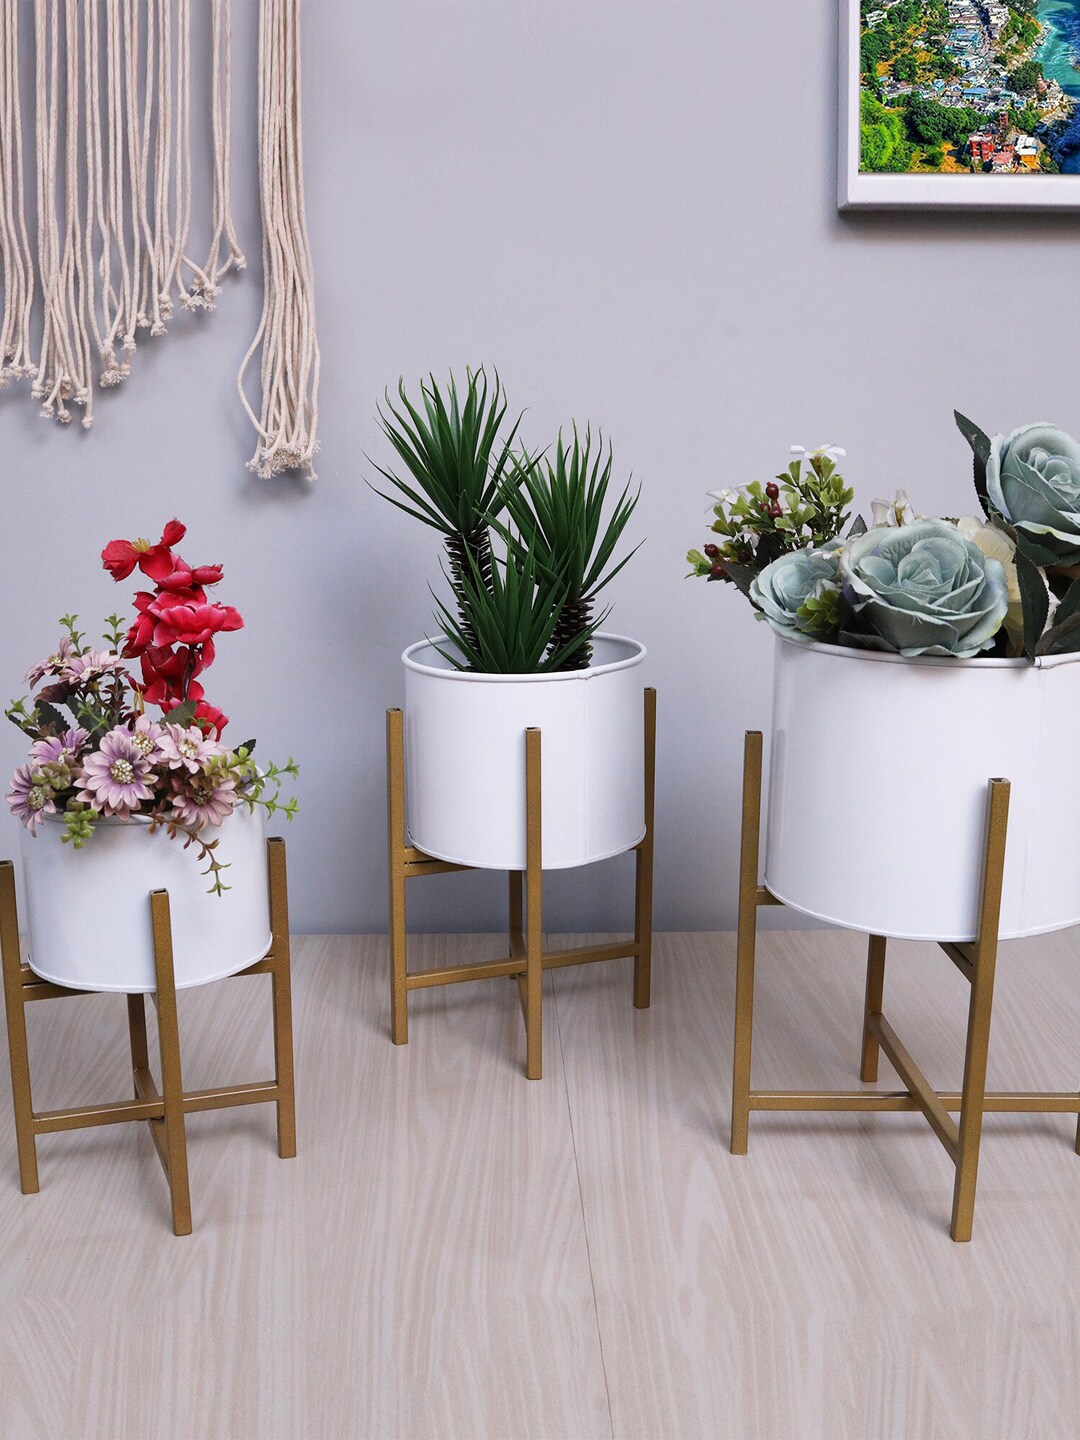 Homesake Set Of 3 White & Brown Metal Planter Pots with Stands Price in India